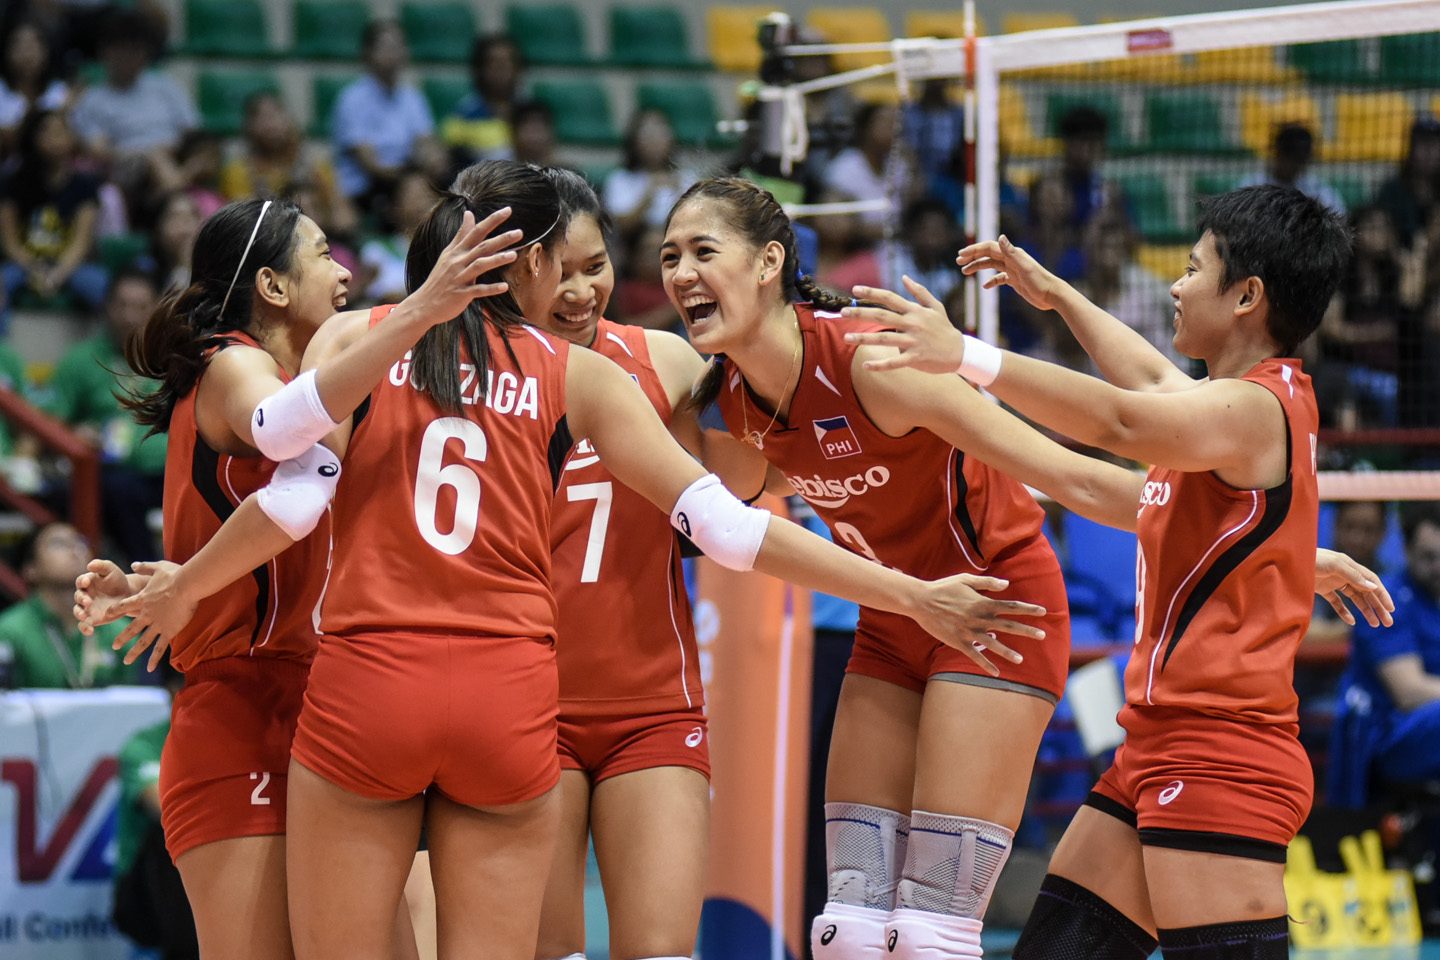 The fight goes on for PH volleyball after Asian Seniors stint